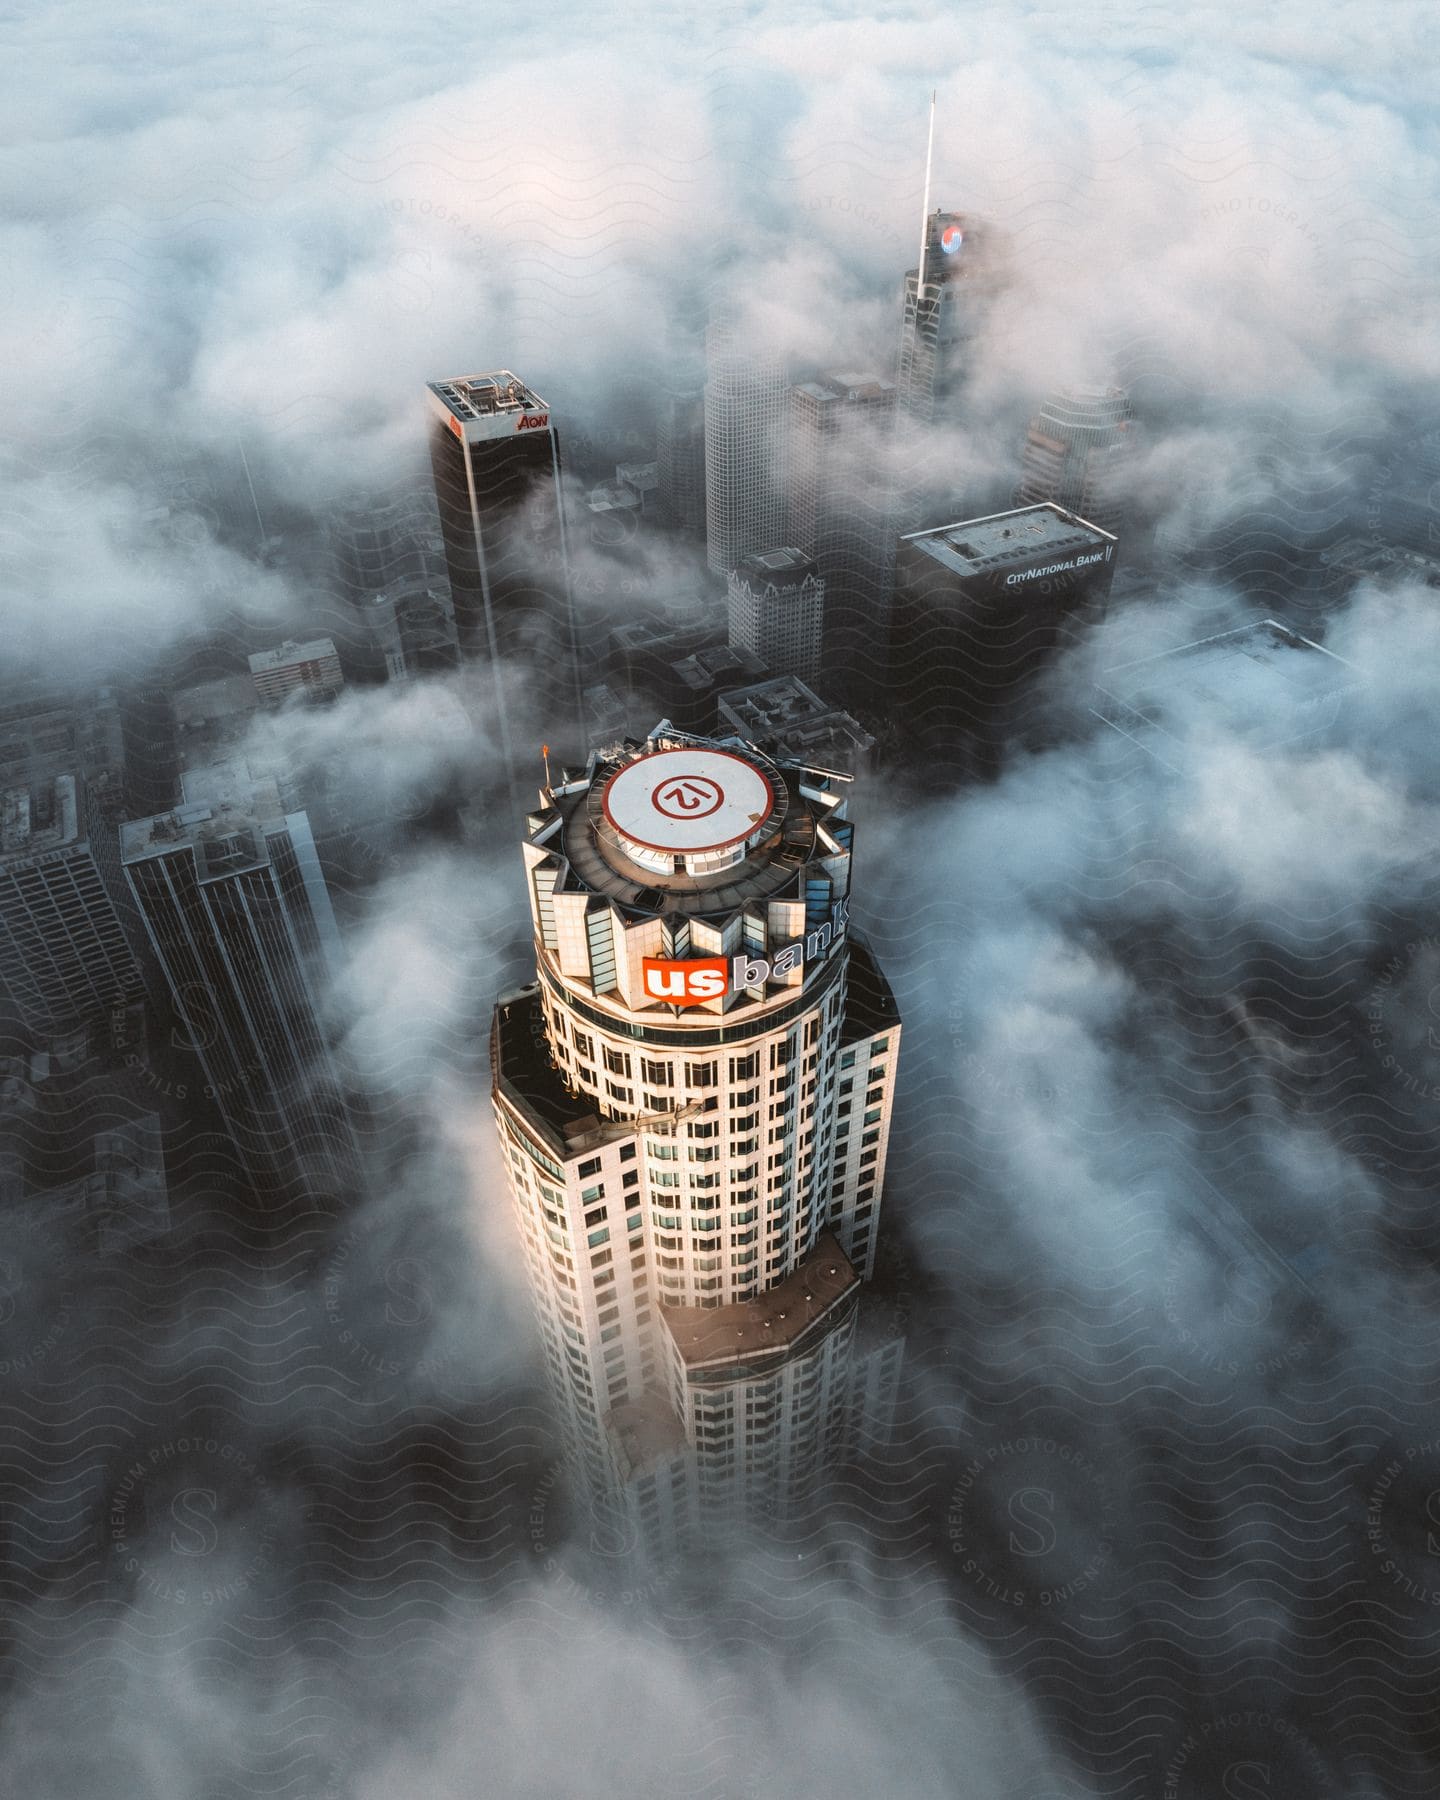 On a sunny day, the top of the US Bank skyscraper stands tall, with "12" clearly marked on the helipad. The building is surrounded by other towering skyscrapers, and the atmosphere is veiled in a mystical fog